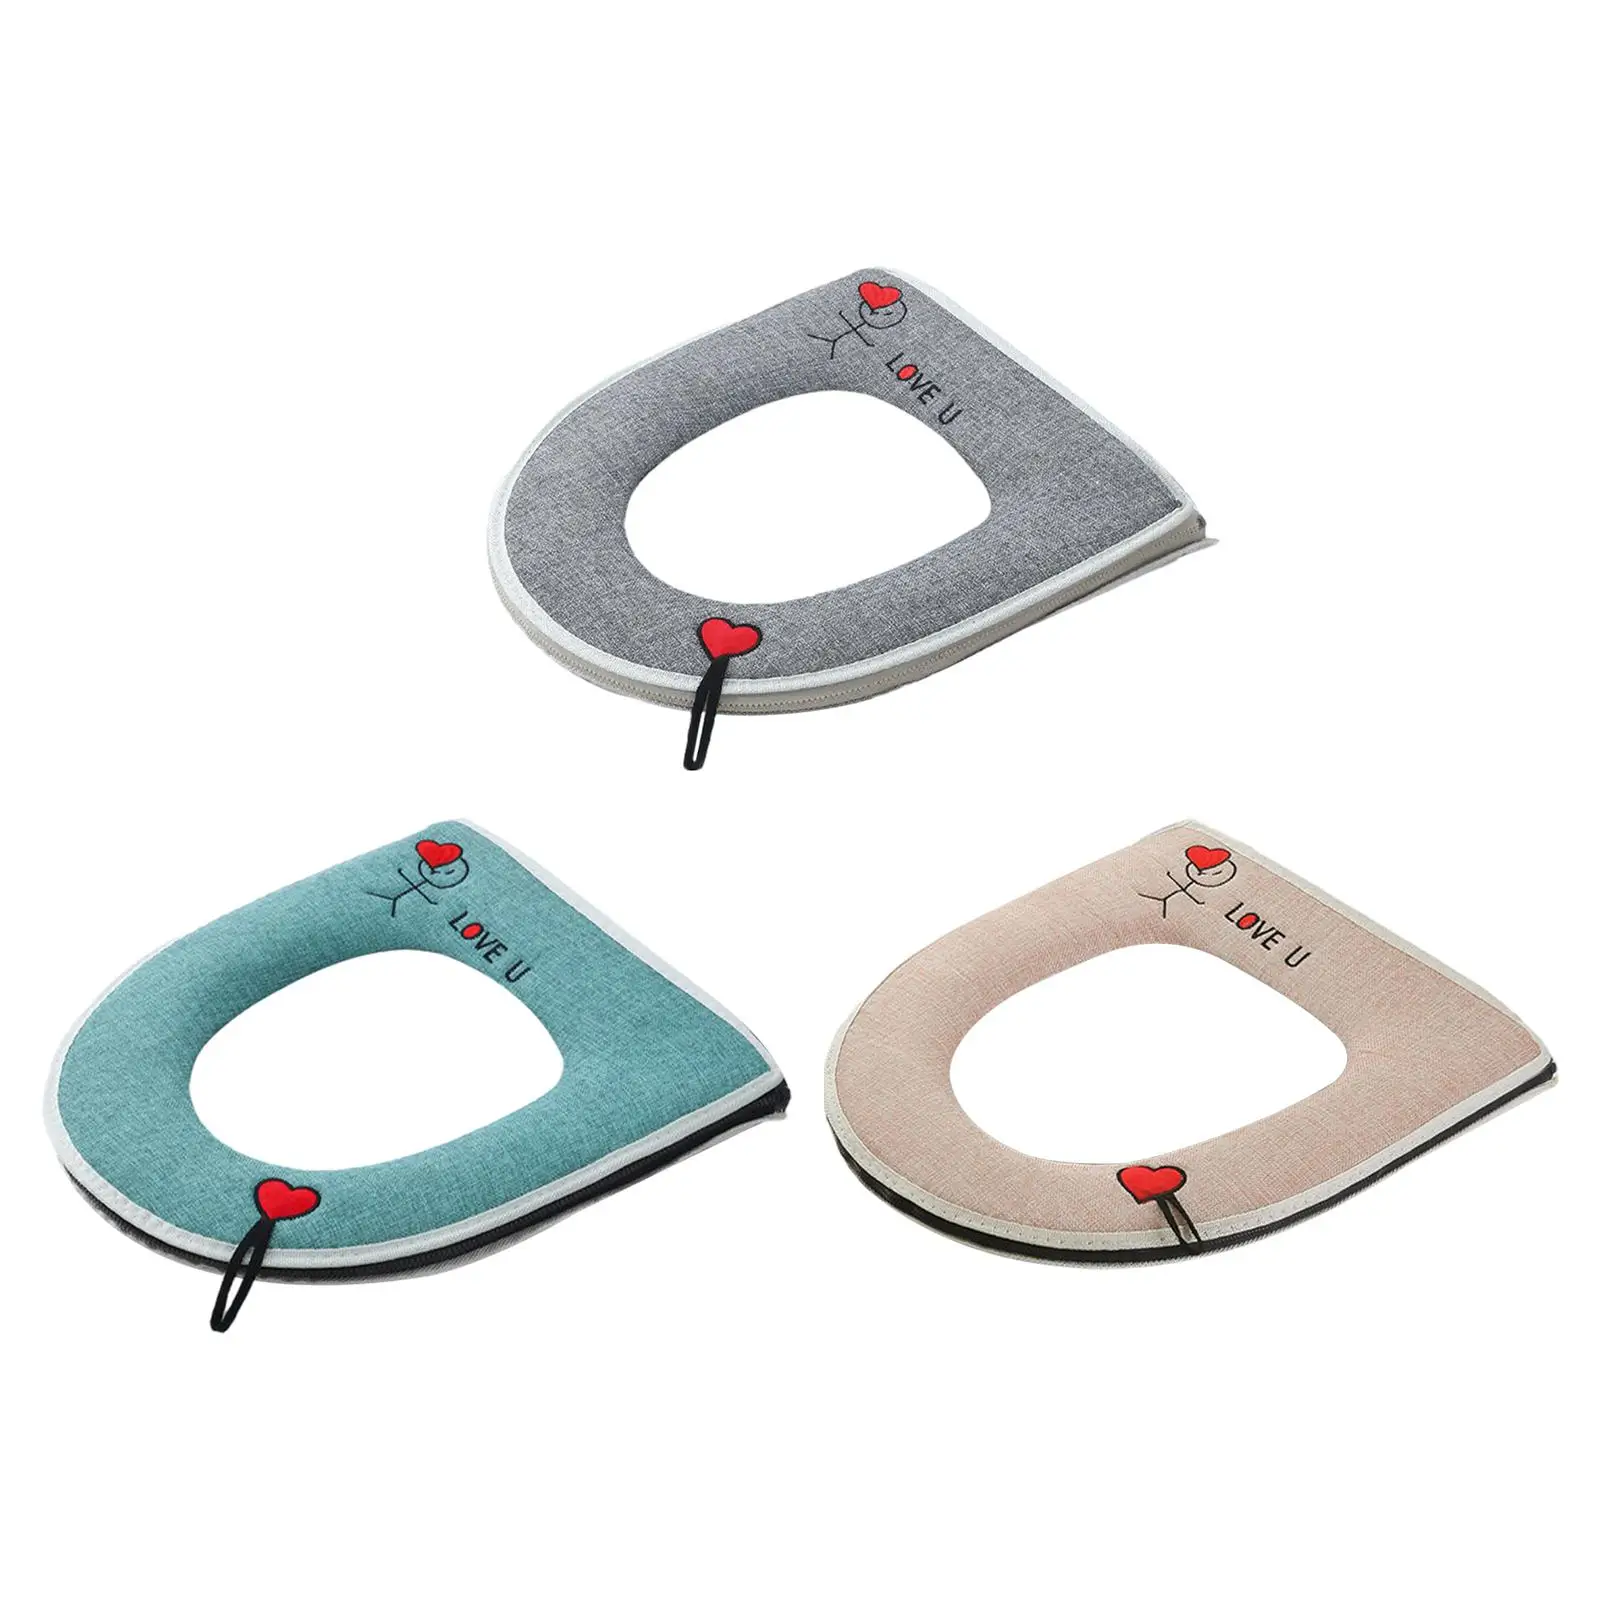 Thicken Toilet Seat Cushion Soft Warm Toilet Seat Covers for Home Traveling